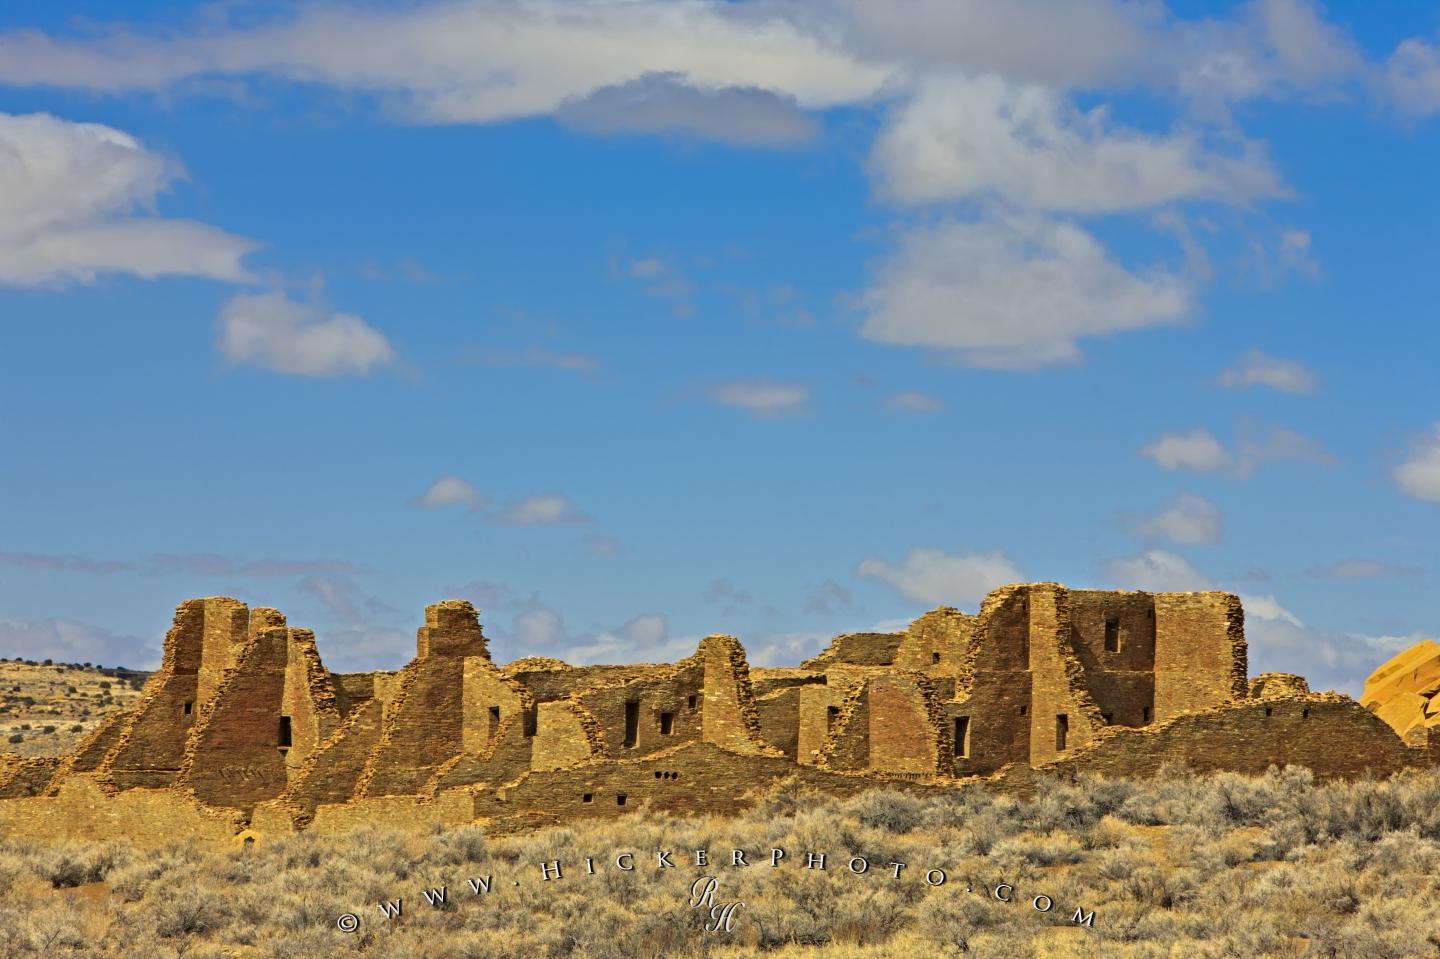 Found At The Chaco Culture National Historic Park In New Mexico Usa